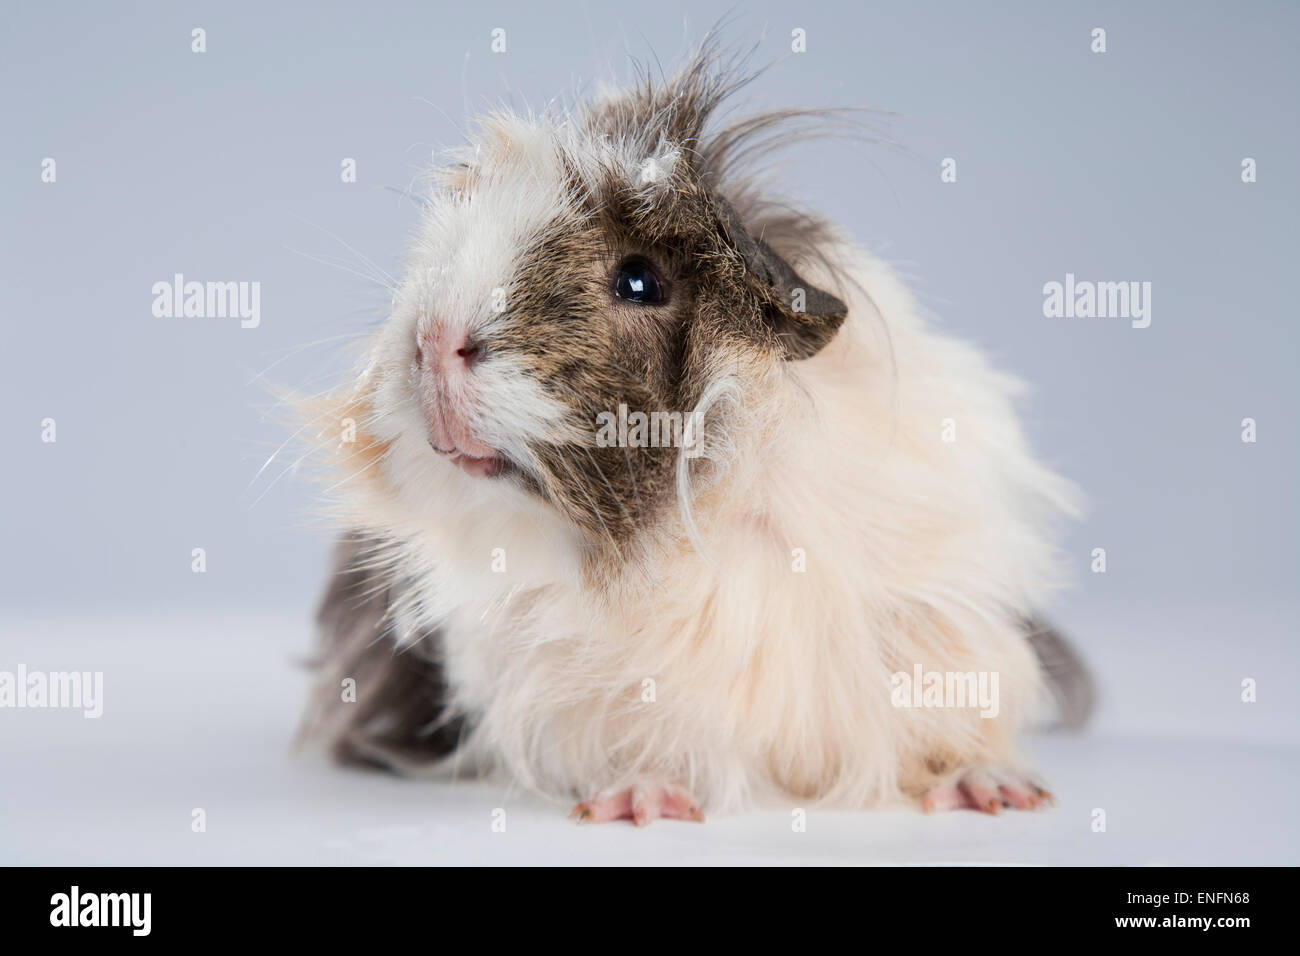 Guinea pig (Cavia porcellus domestica), long-haired with white gray fur Stock Photo